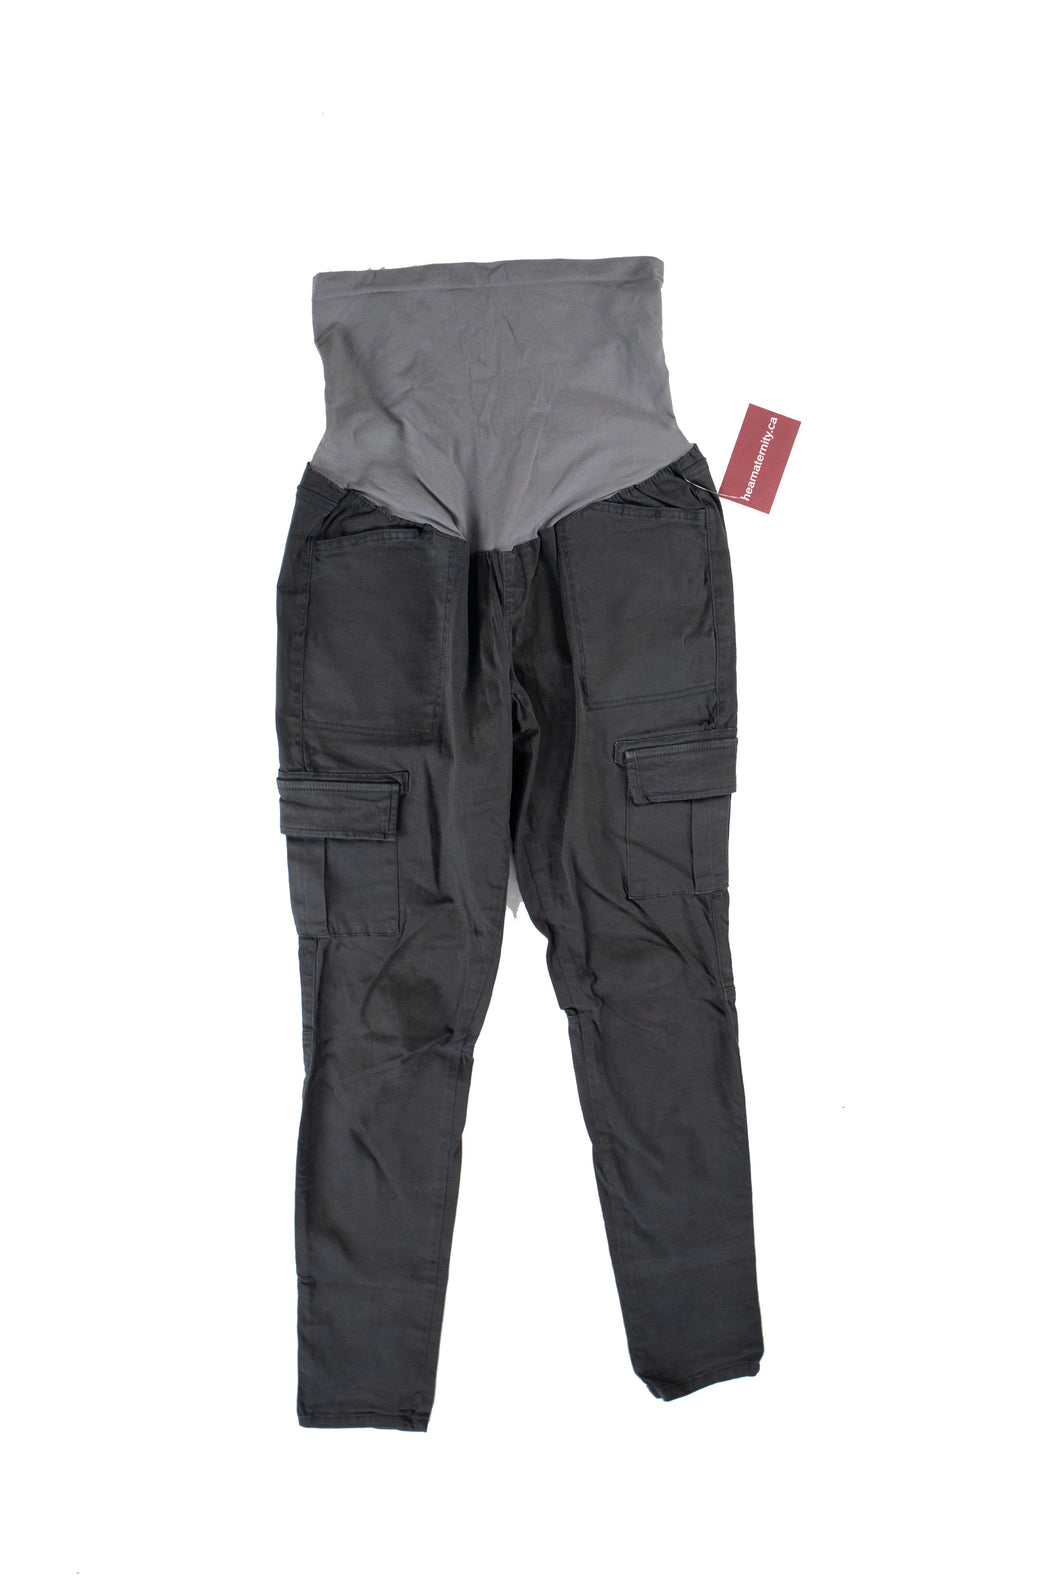 XS LED By Lux Skinny Maternity Cargo Pants